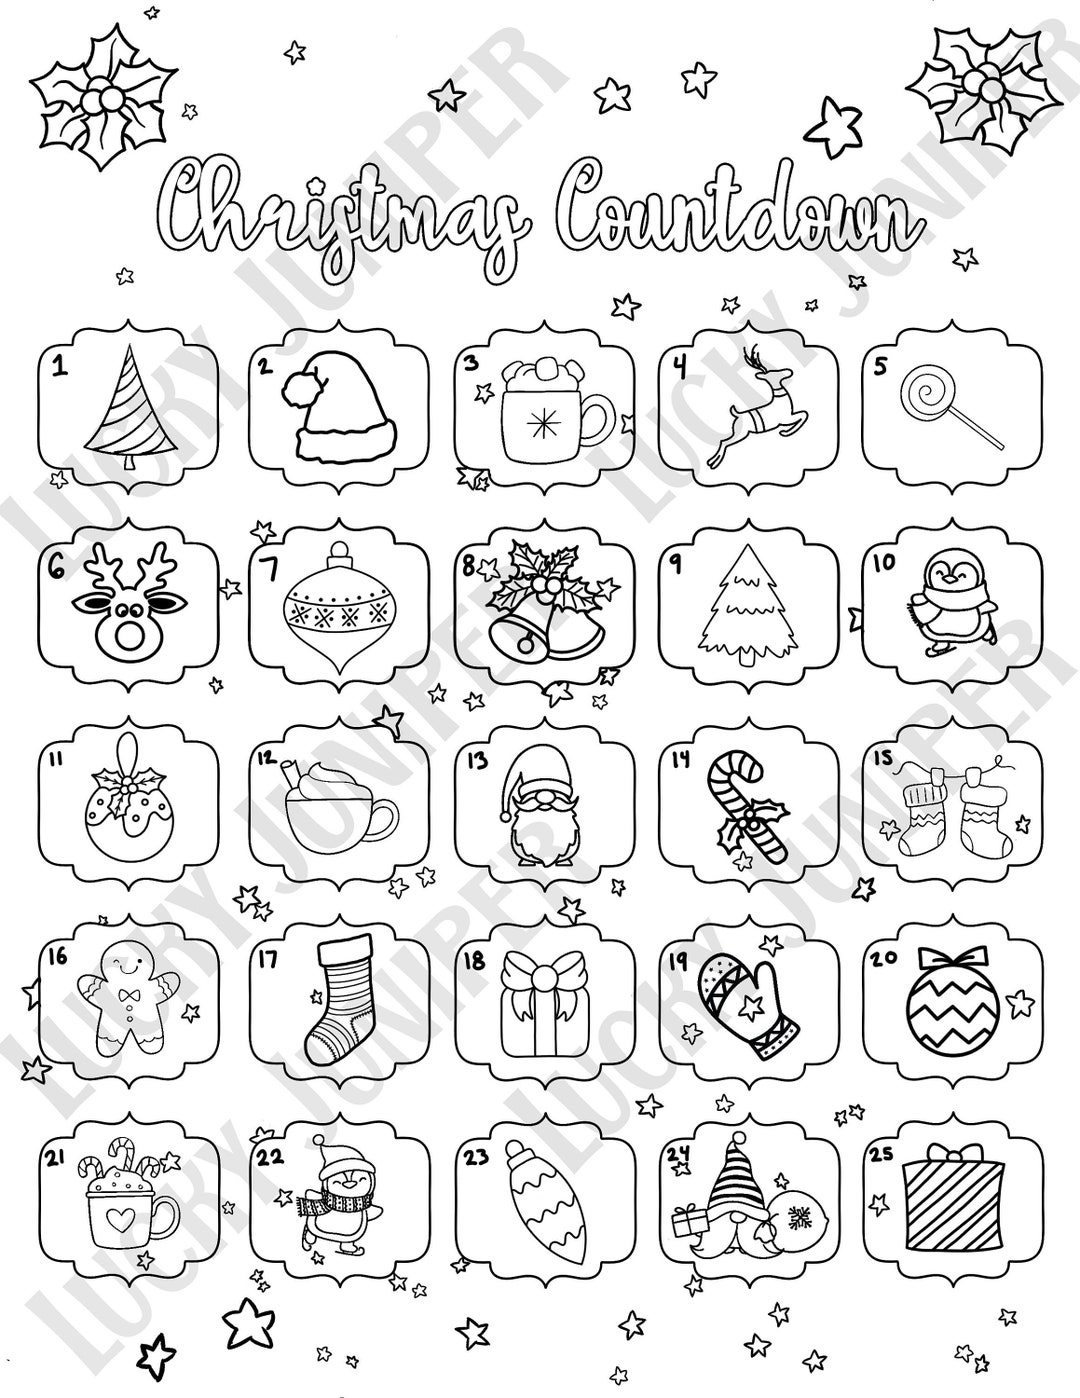 Christmas countdown printable coloring pages advent calendar holiday instant download